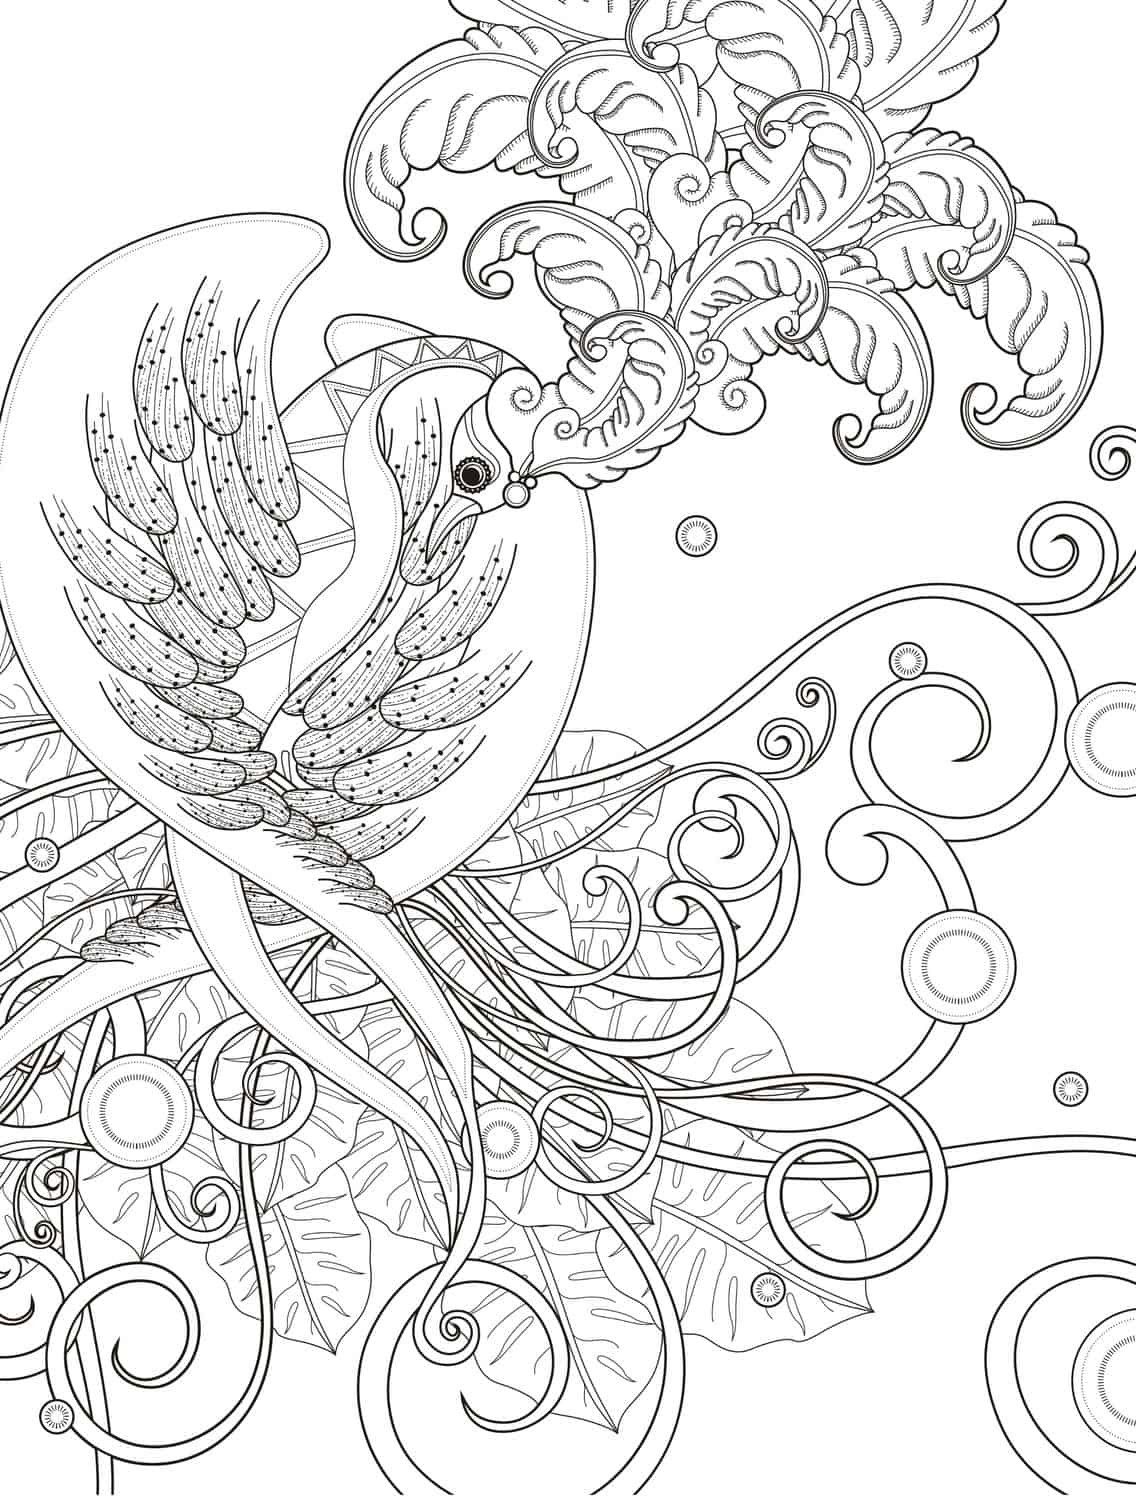 Bird Coloring Book For Adults
 20 Gorgeous Free Printable Adult Coloring Pages Page 15